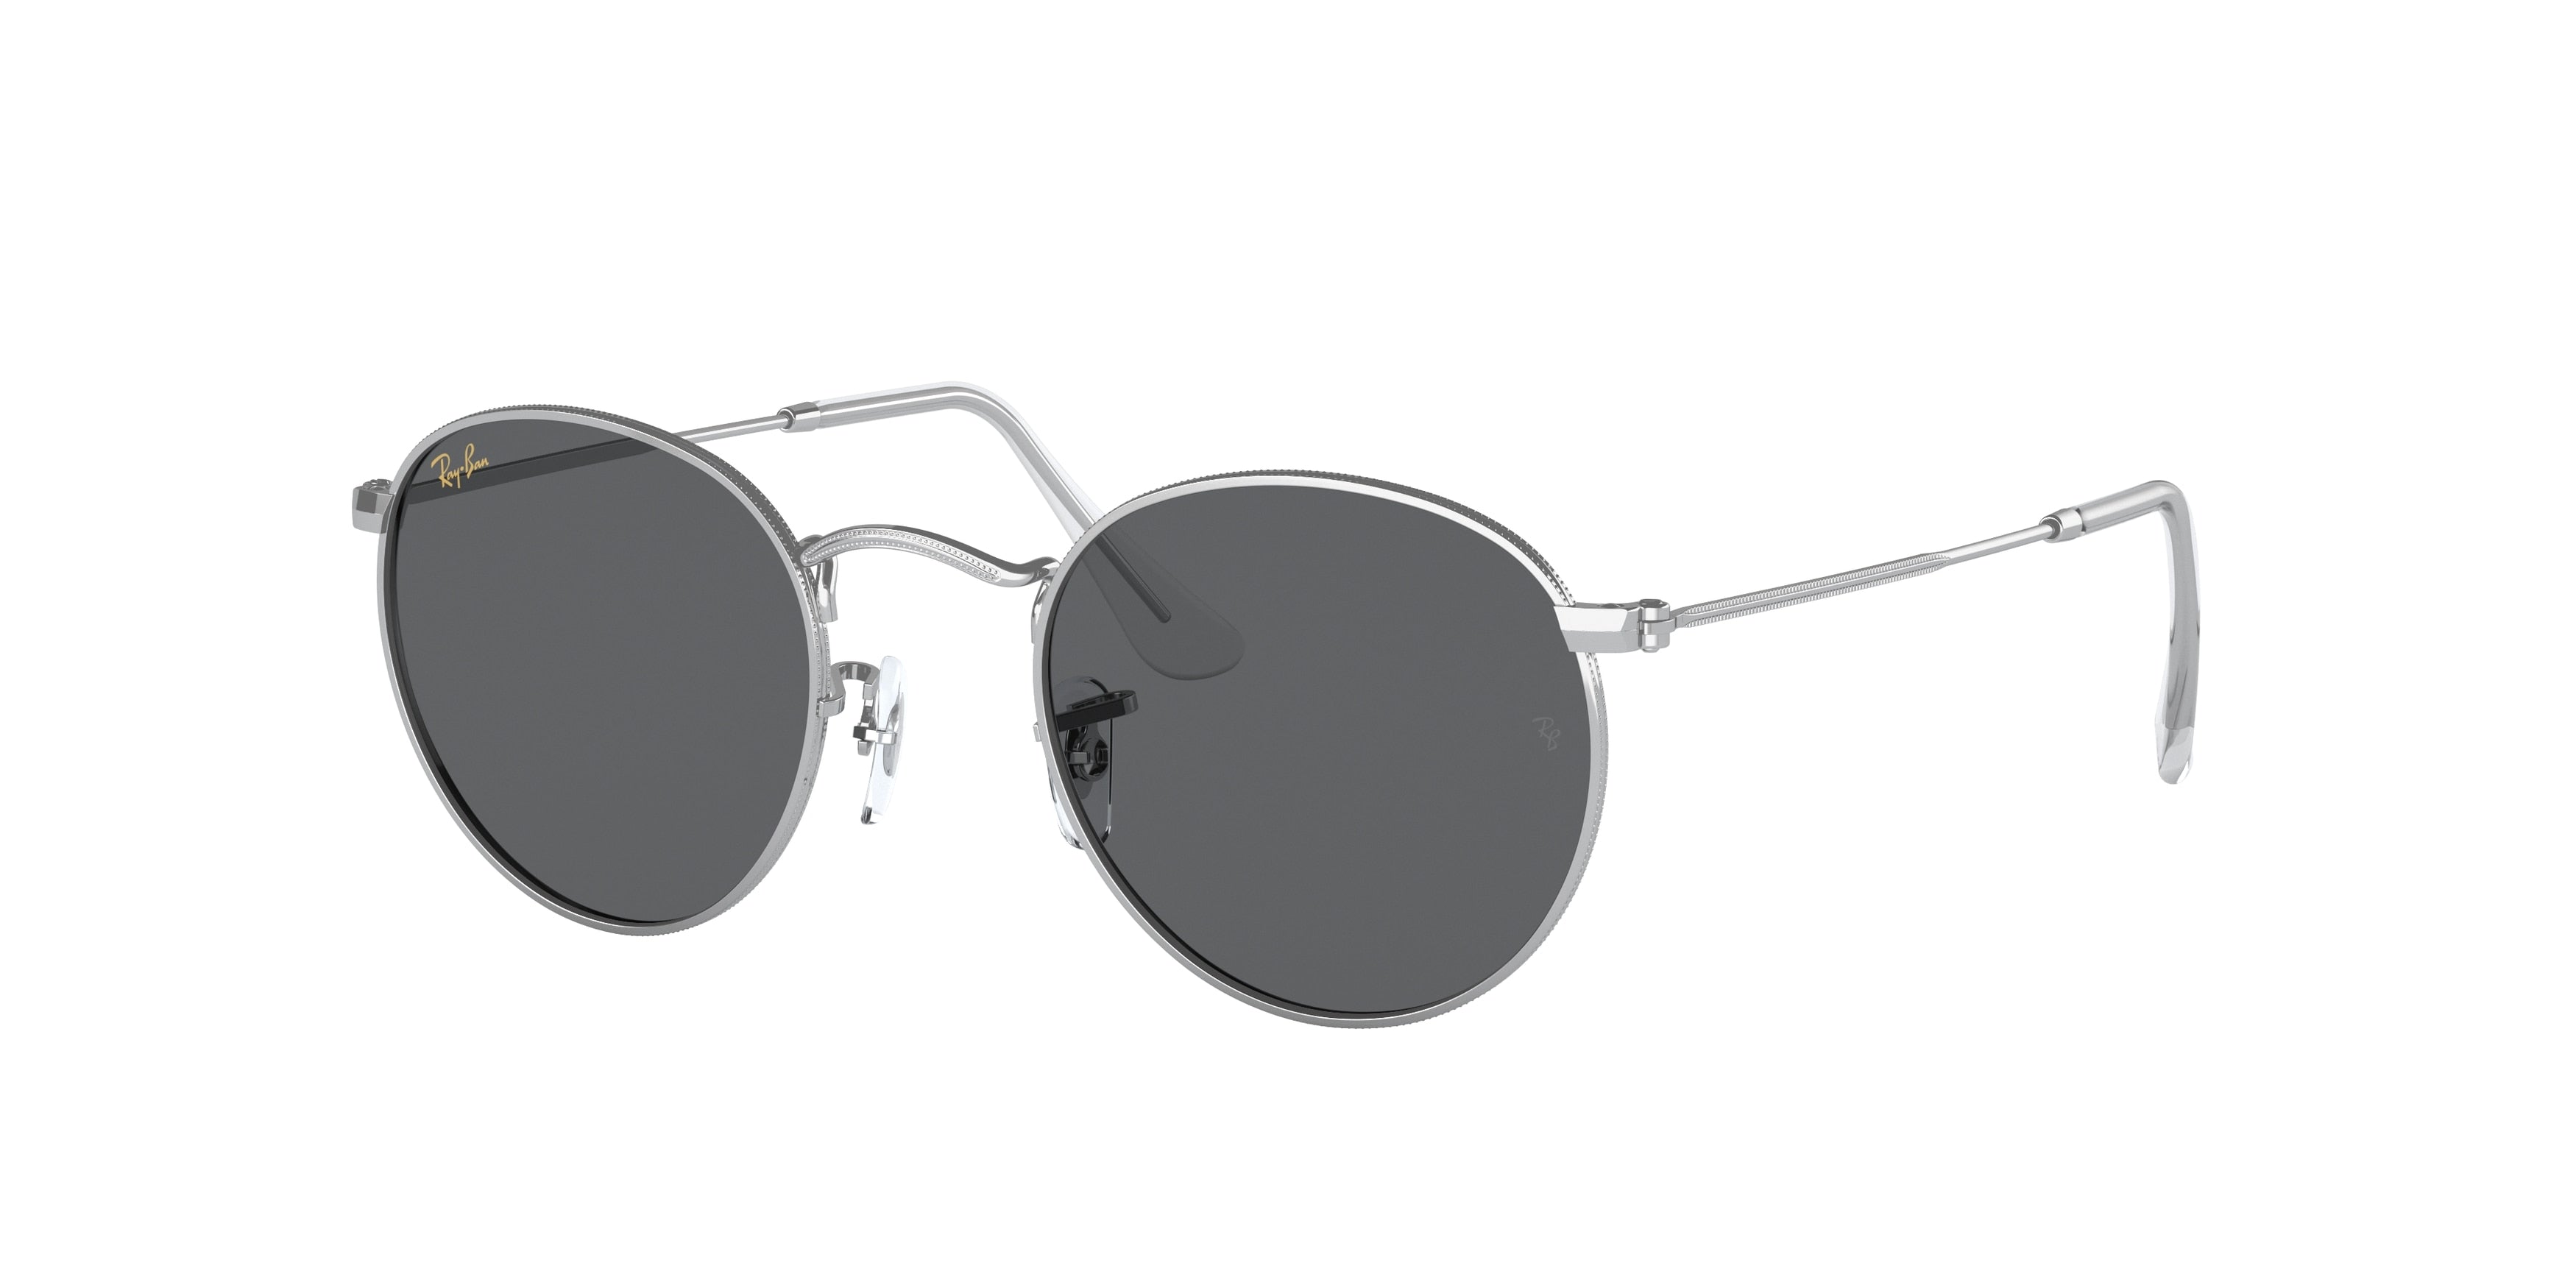 Ray-Ban ROUND METAL RB3447 Round Sunglasses  9198B1-Silver 52-145-21 - Color Map Silver